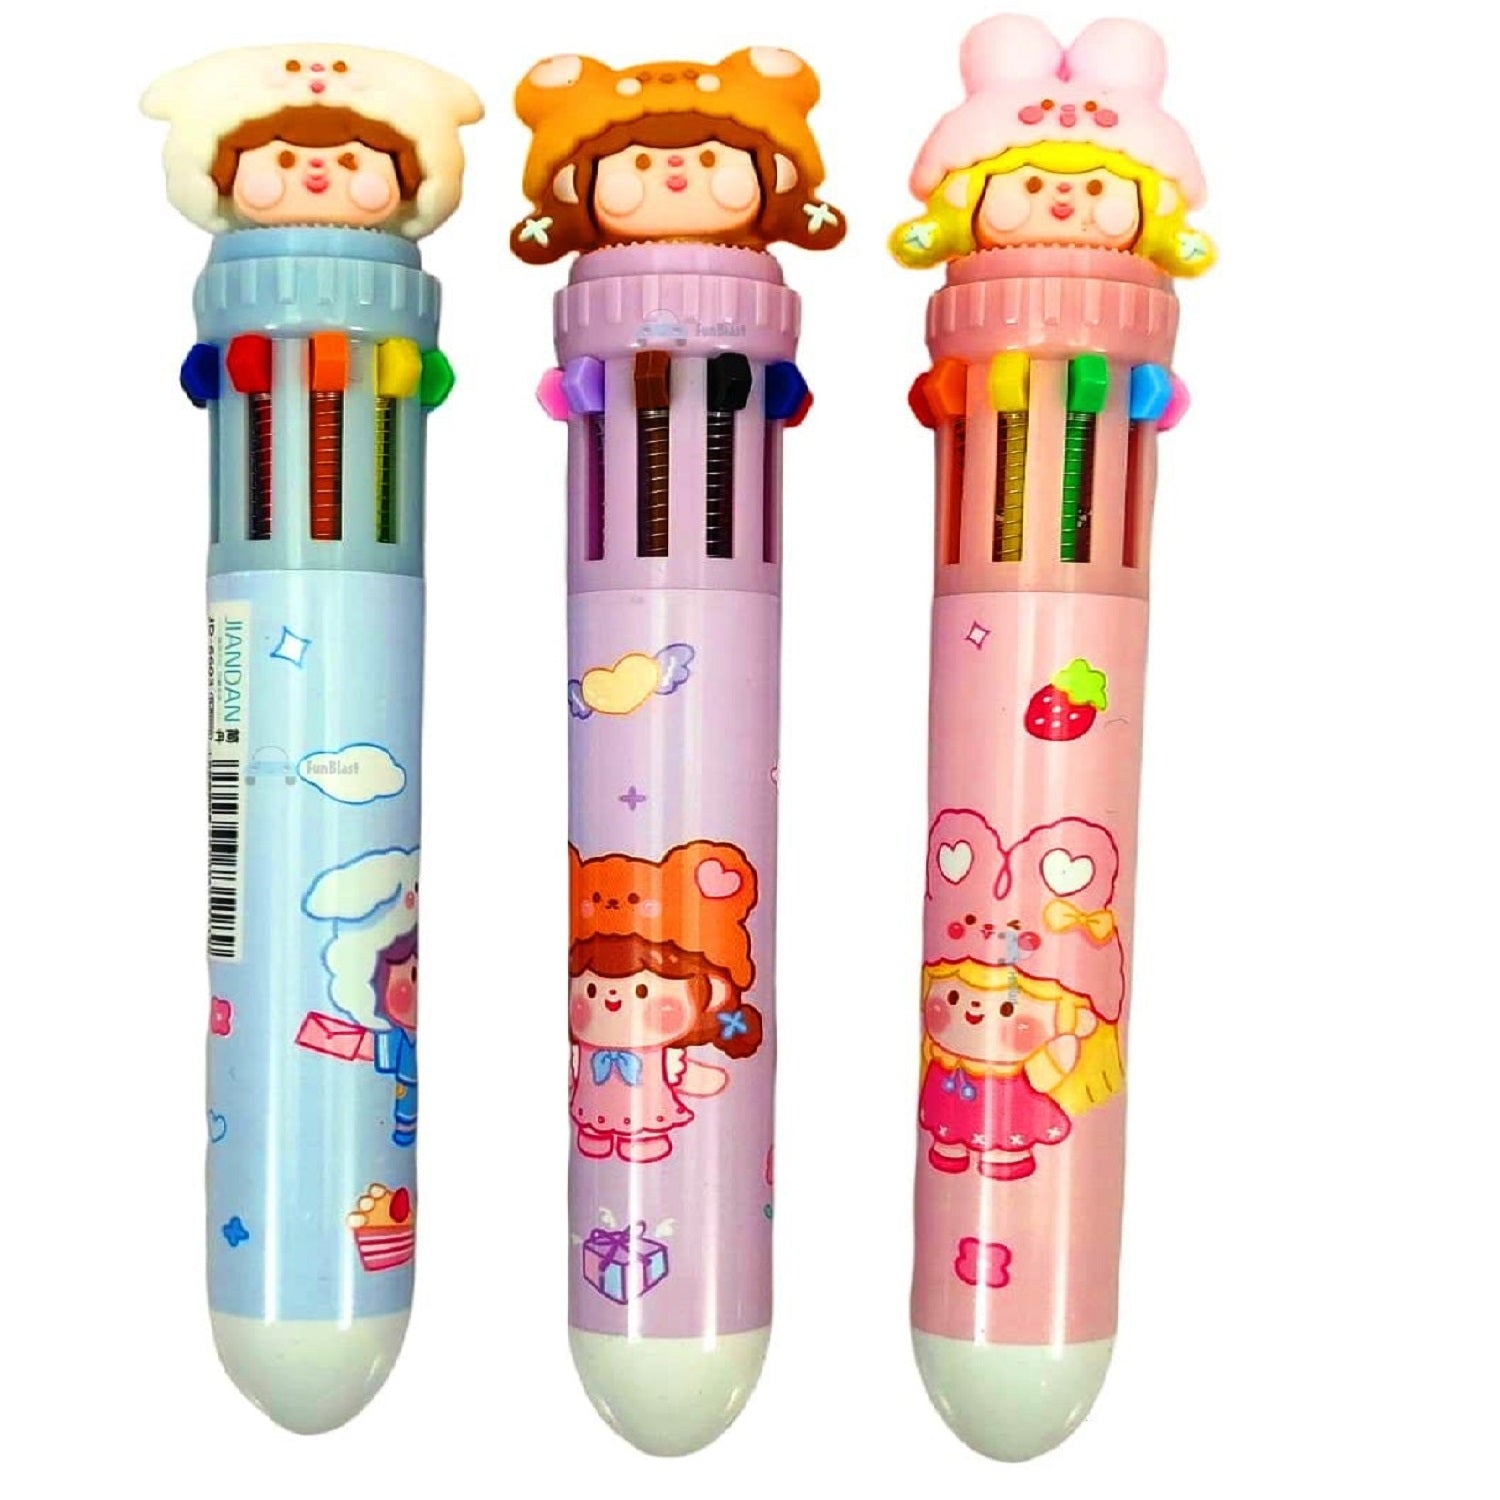 Kids Themed Stationary Accessories-Pencils, Pens, Erasers & 1